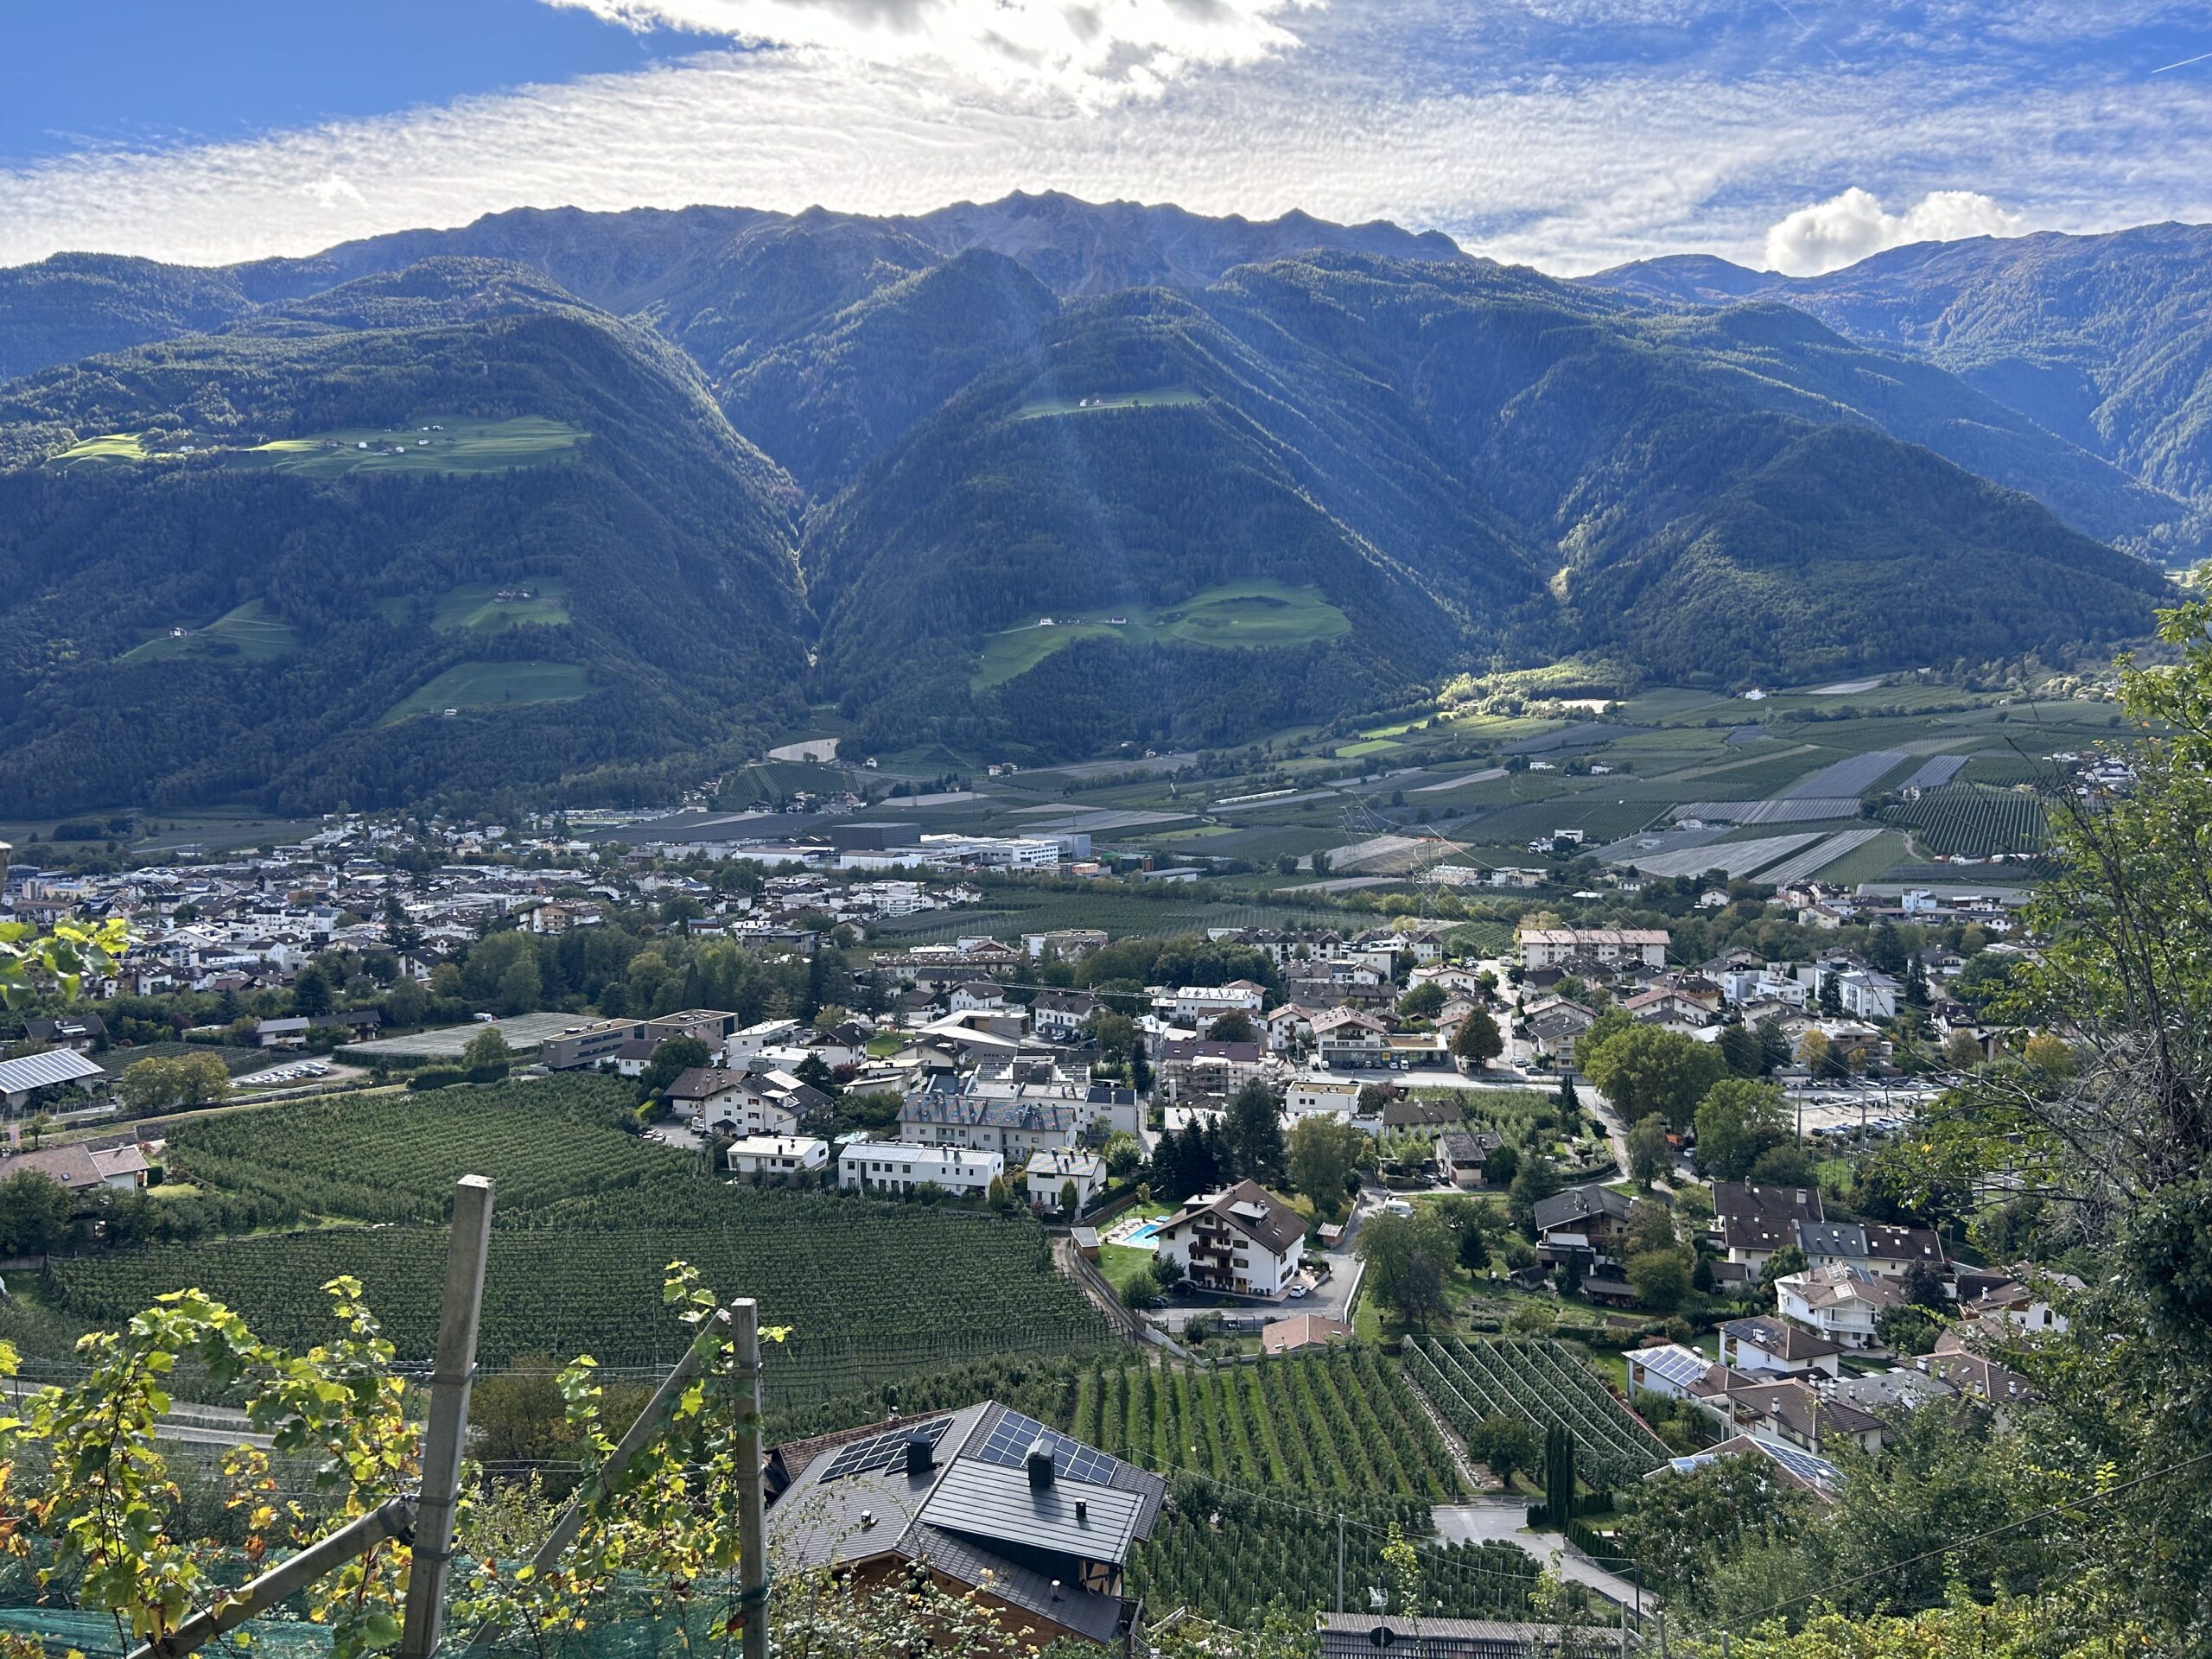 A view of vineyards and mountains in Südtirol-Alto Adige (aka South Tyrol).